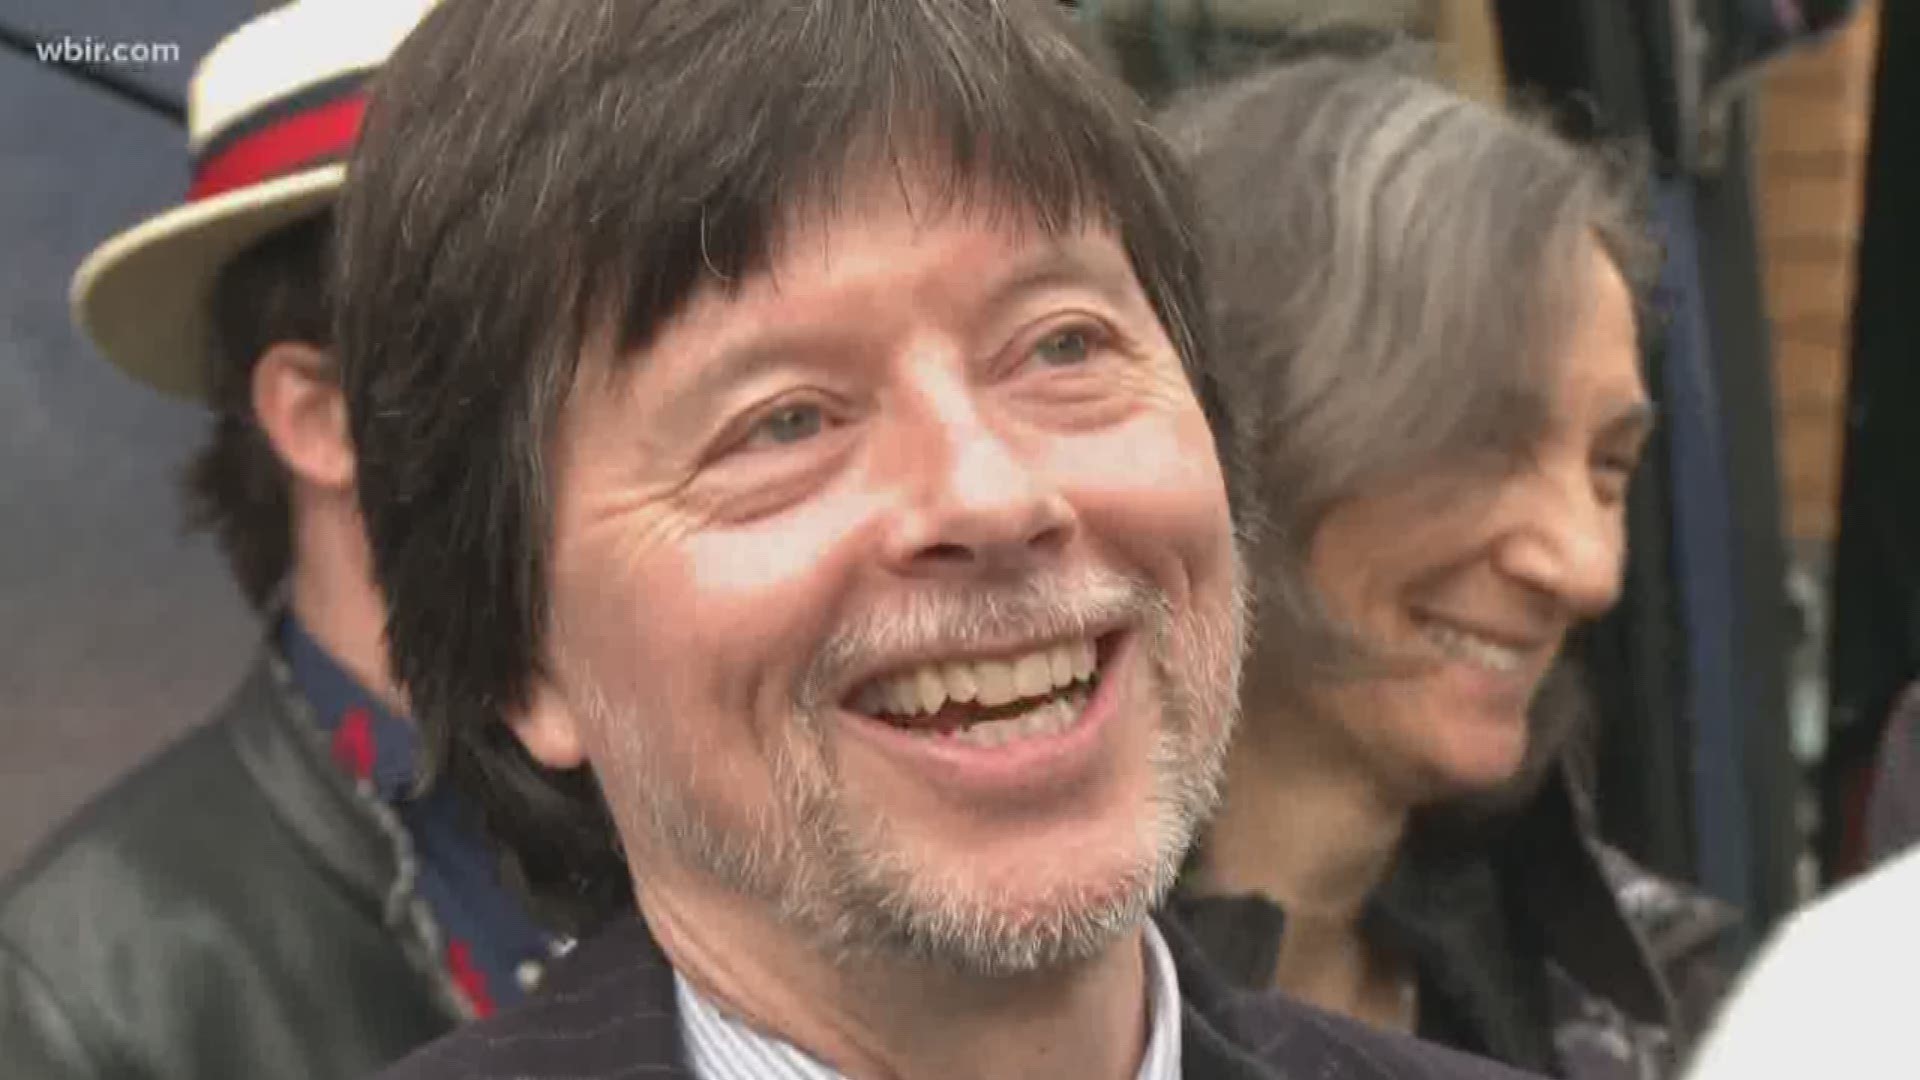 Legendary documentary maker Ken Burns is in East Tennessee to talk about his upcoming documentary on country music.